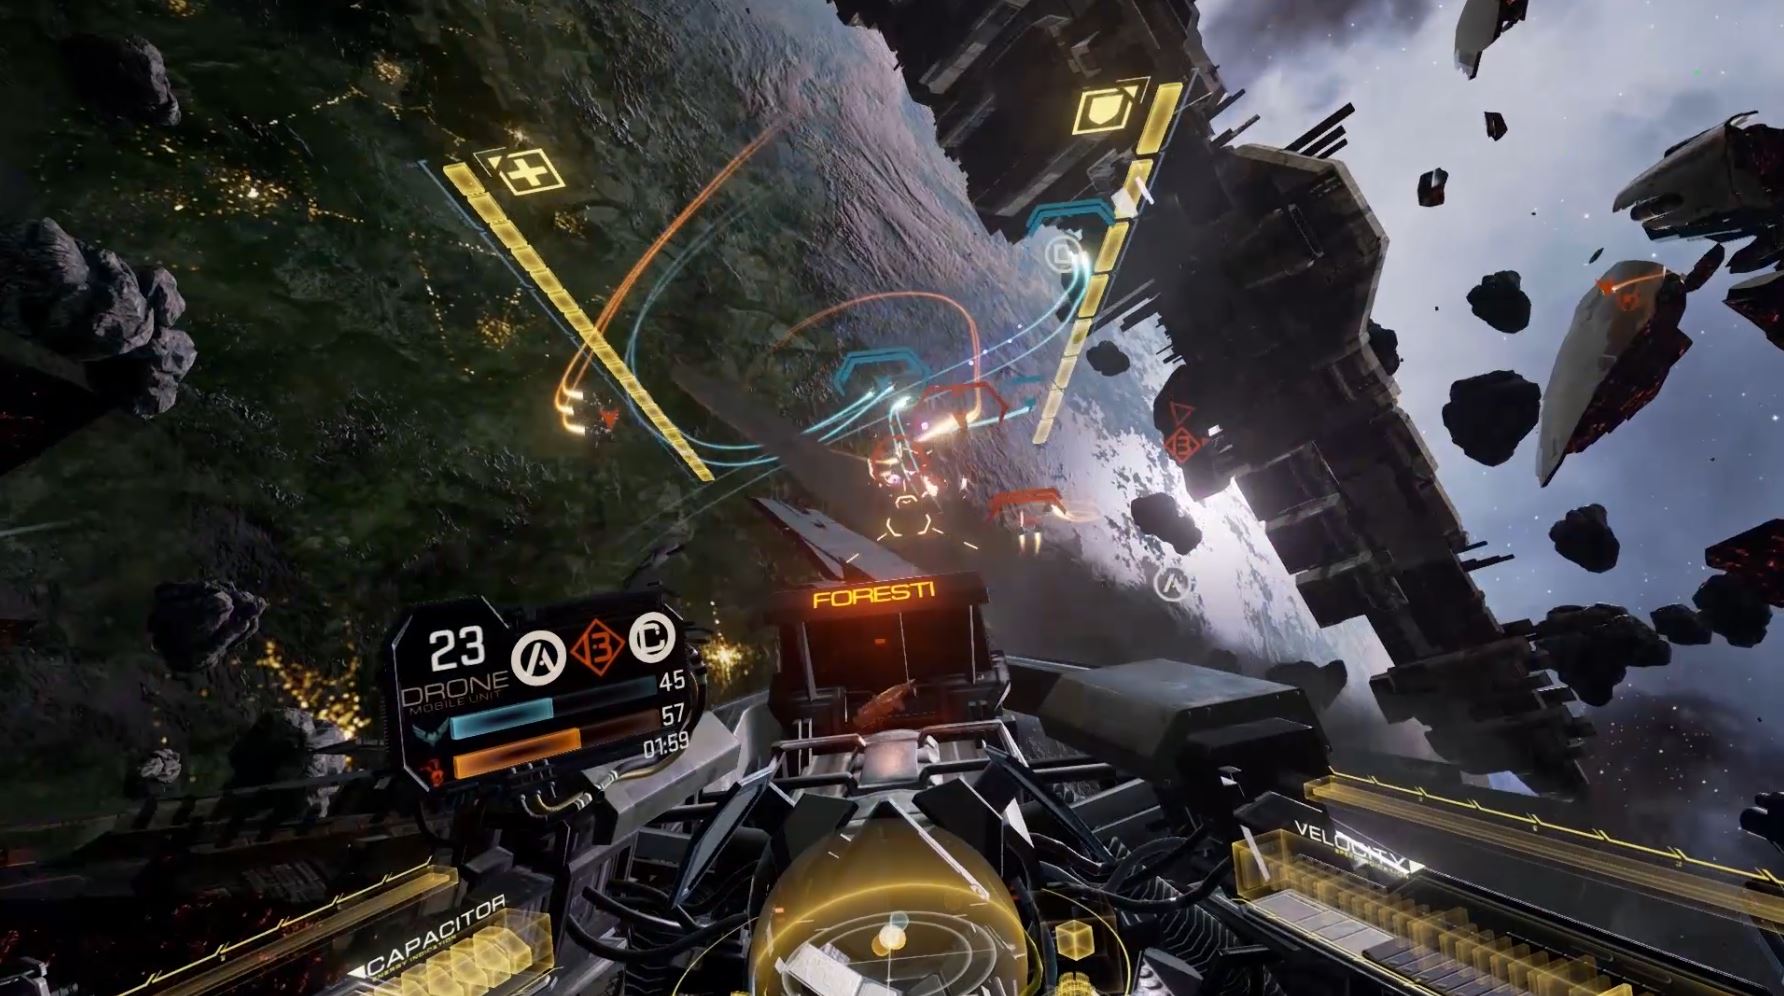 EVE Valkyrie Brings Multiplayer First Person Combat to the Rift. Read the Full Review.